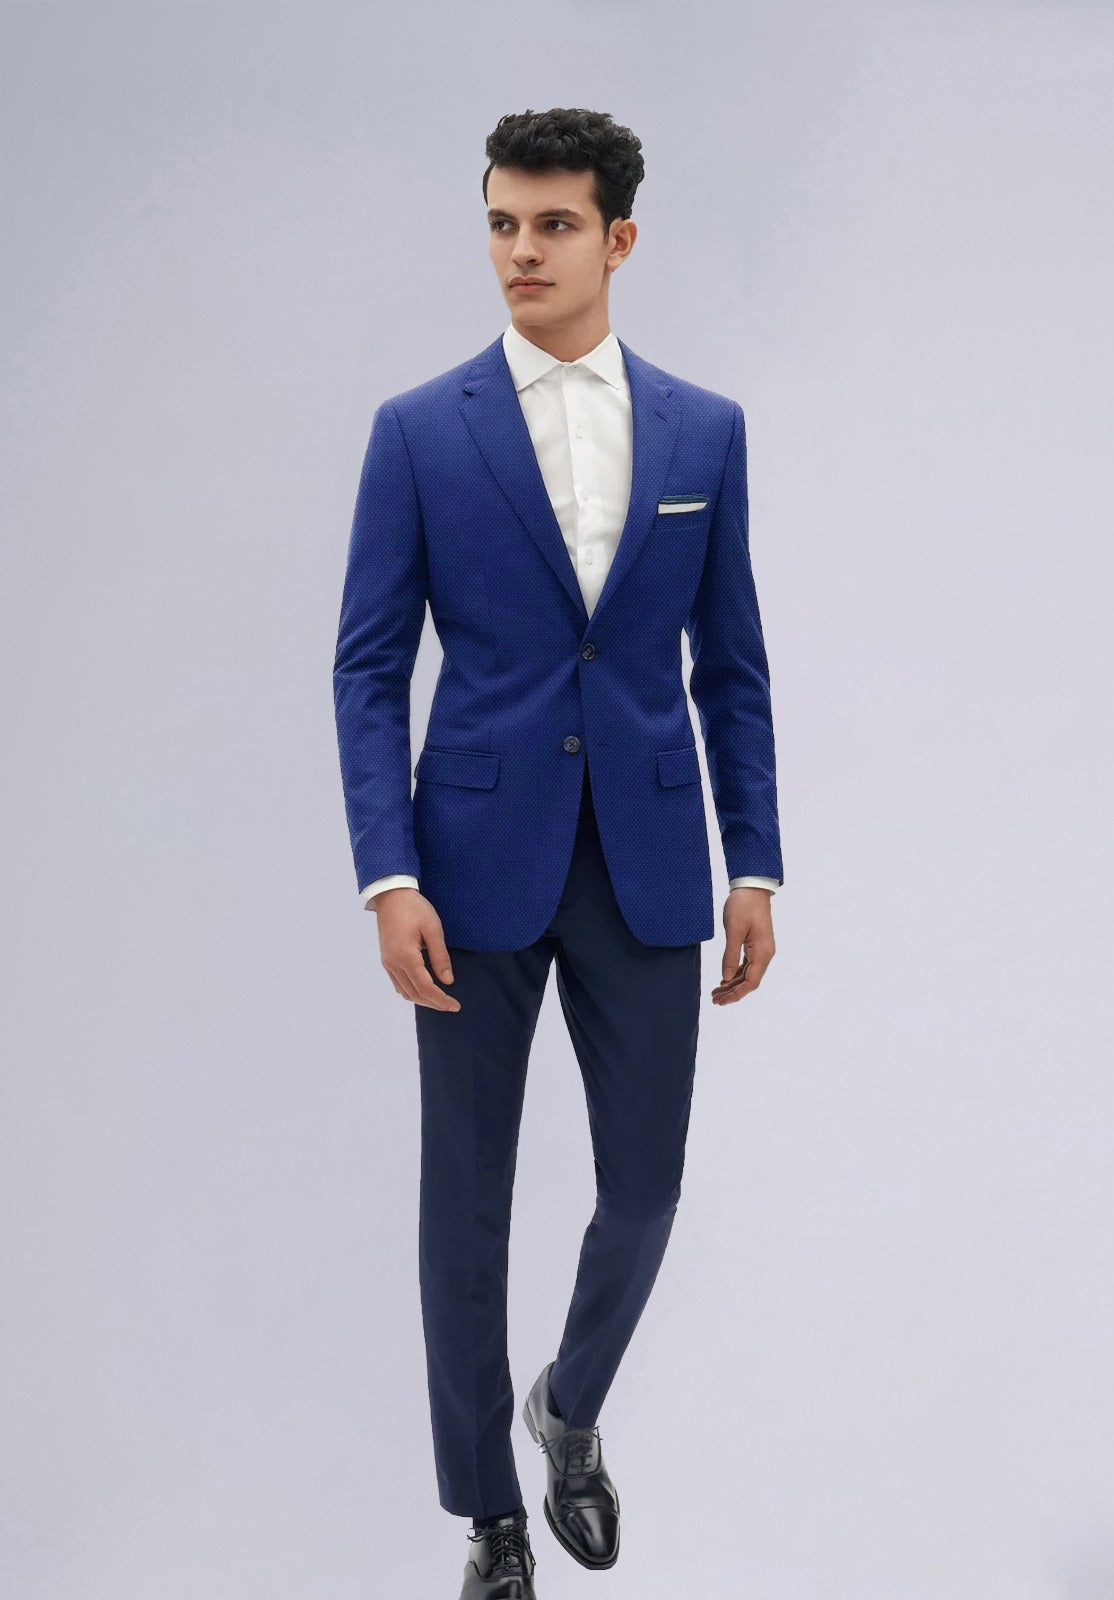 3 Pc Coat-Pant Suit With Waistcoat at Rs 2500 | Gents Suits in Bengaluru |  ID: 24209961533